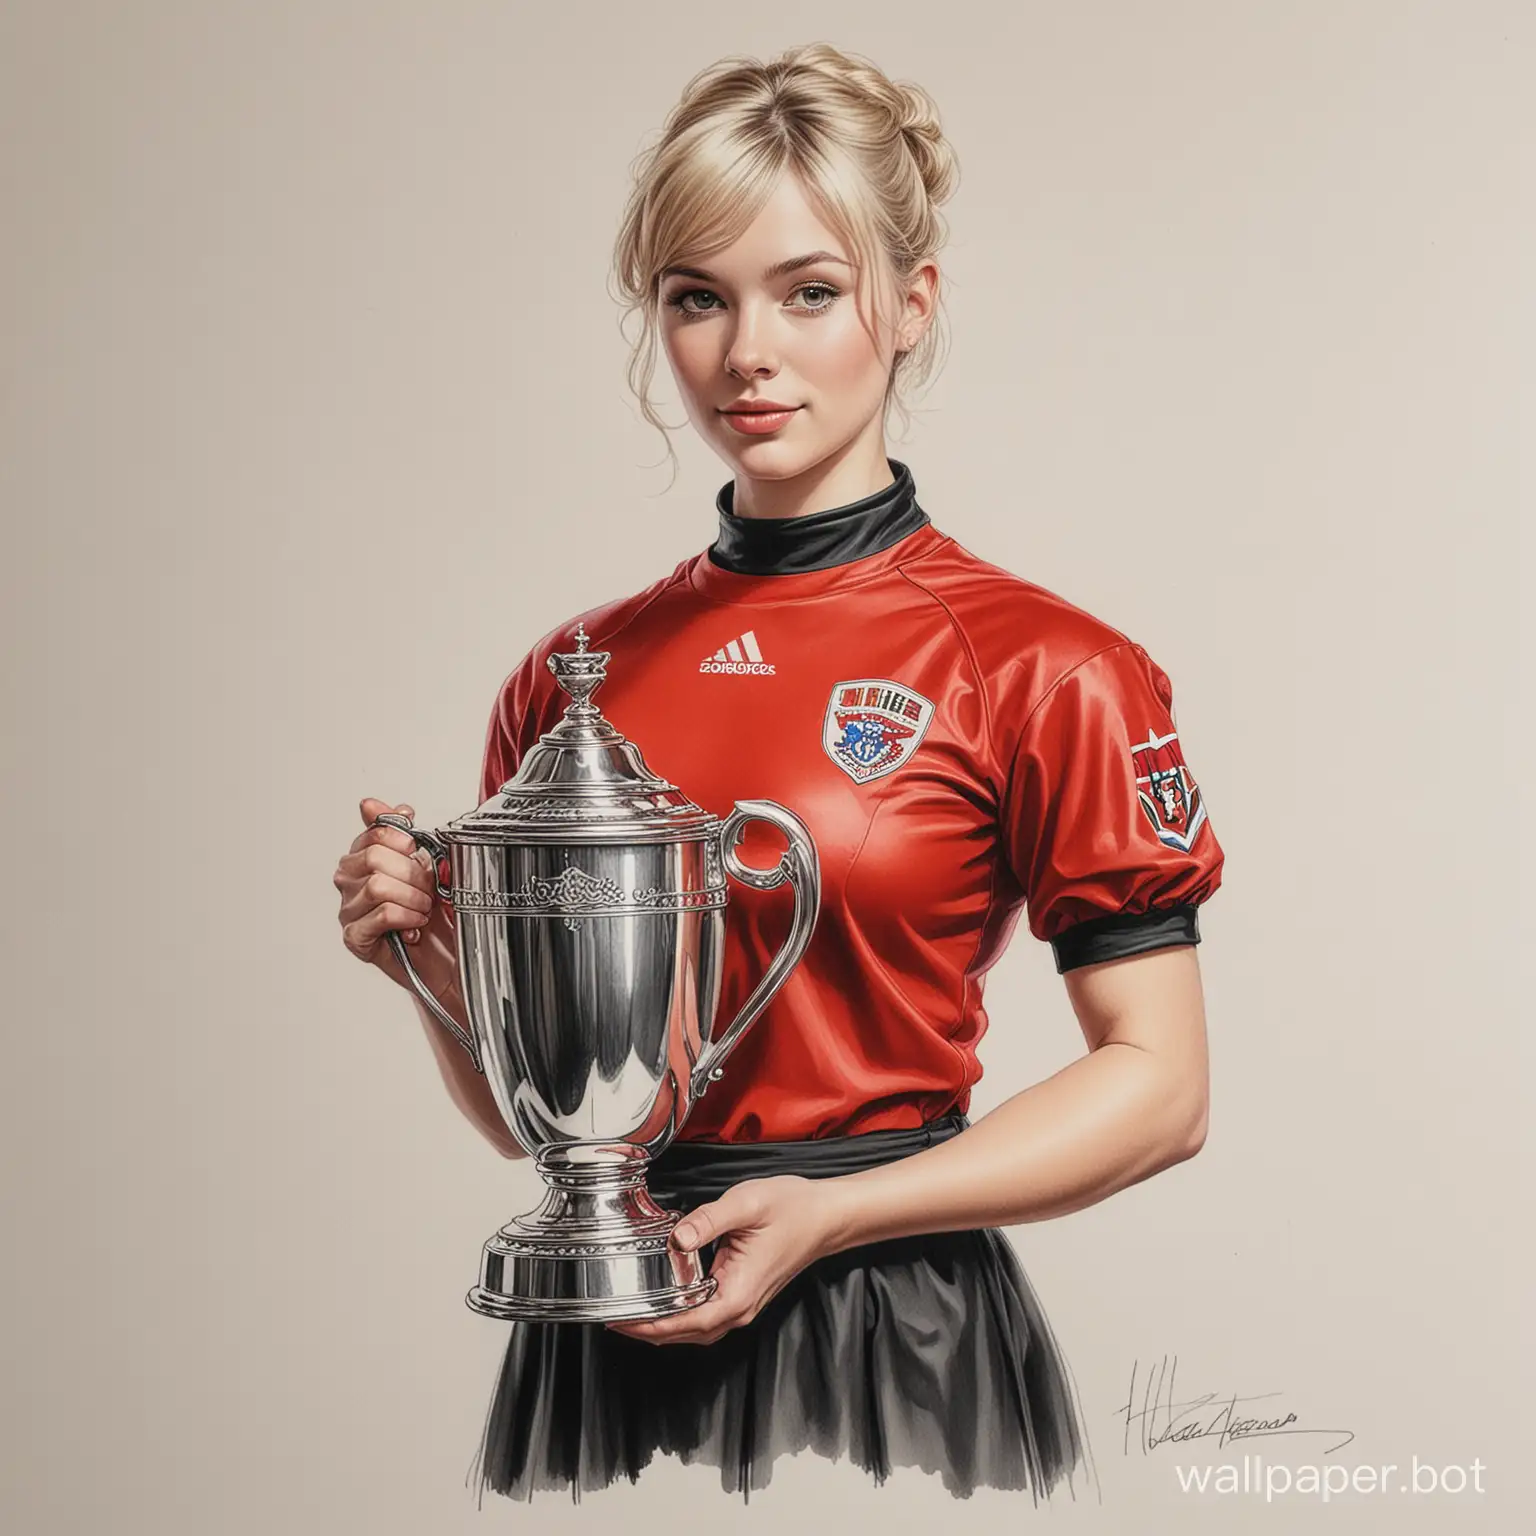 sketch young Hilda Anderson 26 years old light short hair 4 breast size narrow waist in red and black football uniform holding a large cup of champions white background high realism drawing with colored marker Victorian